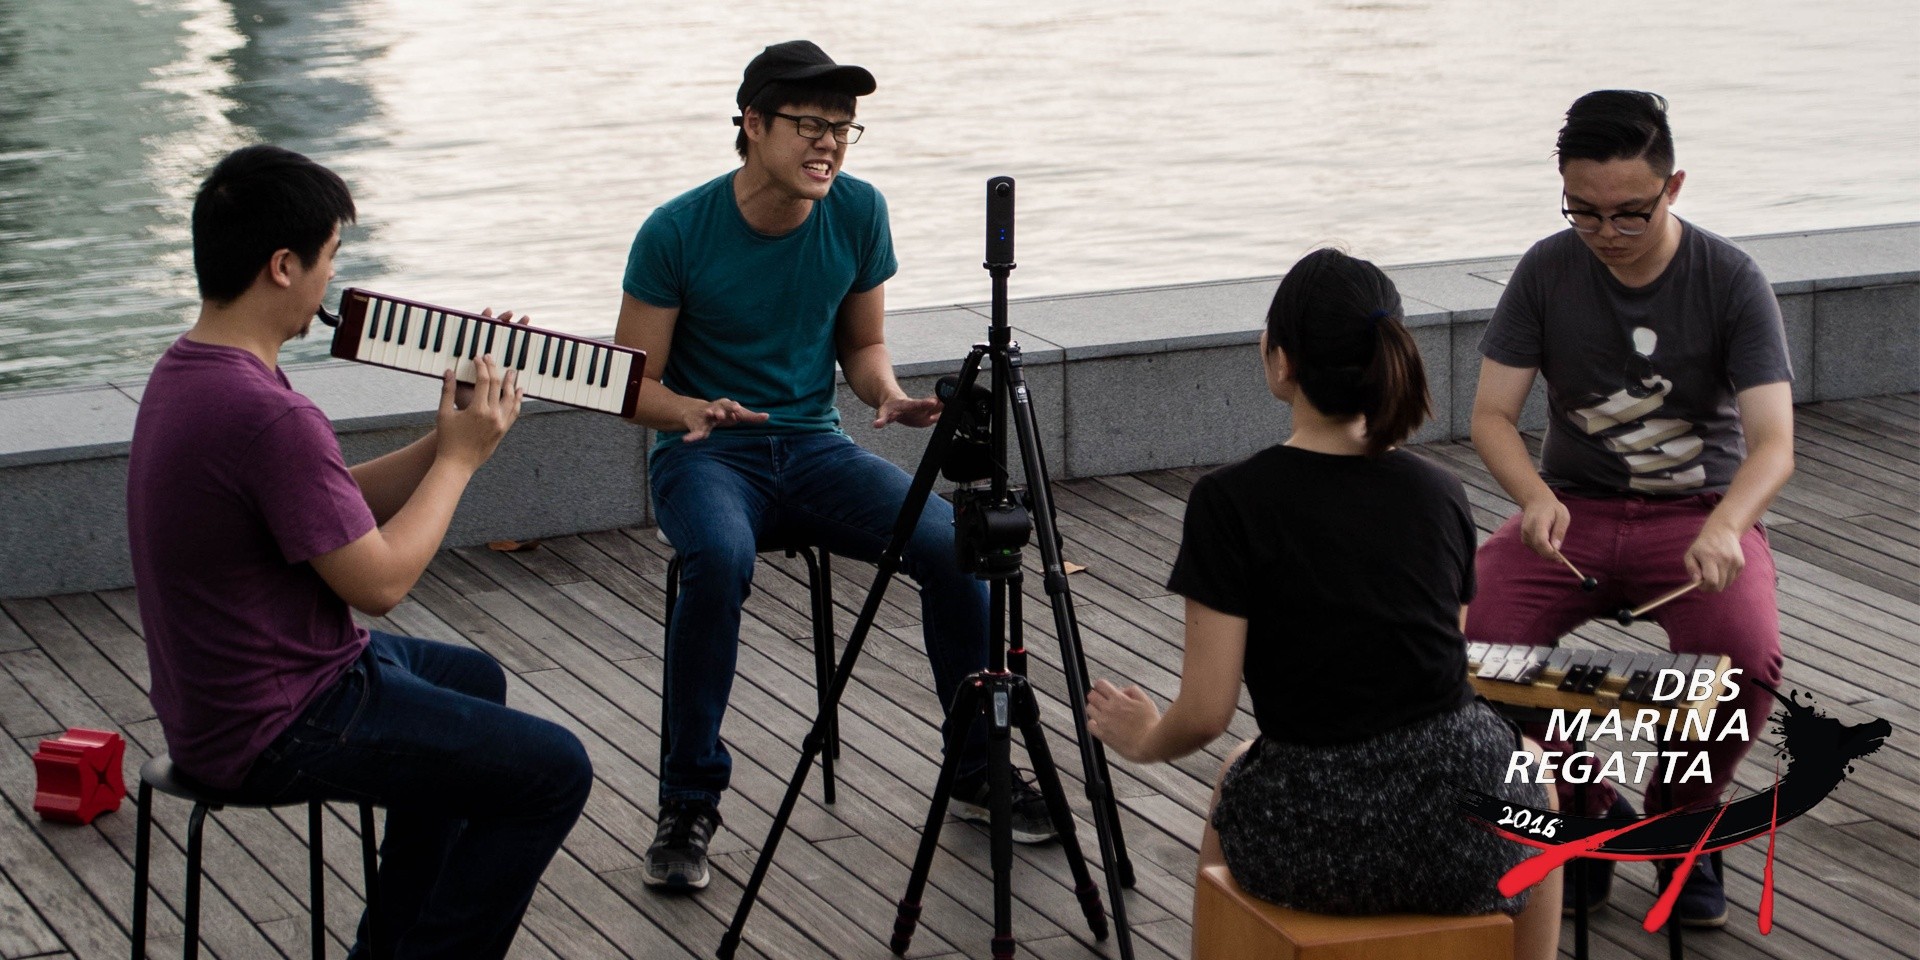 Singaporean artists lined up for DBS Marina Regatta perform songs in 360° videos